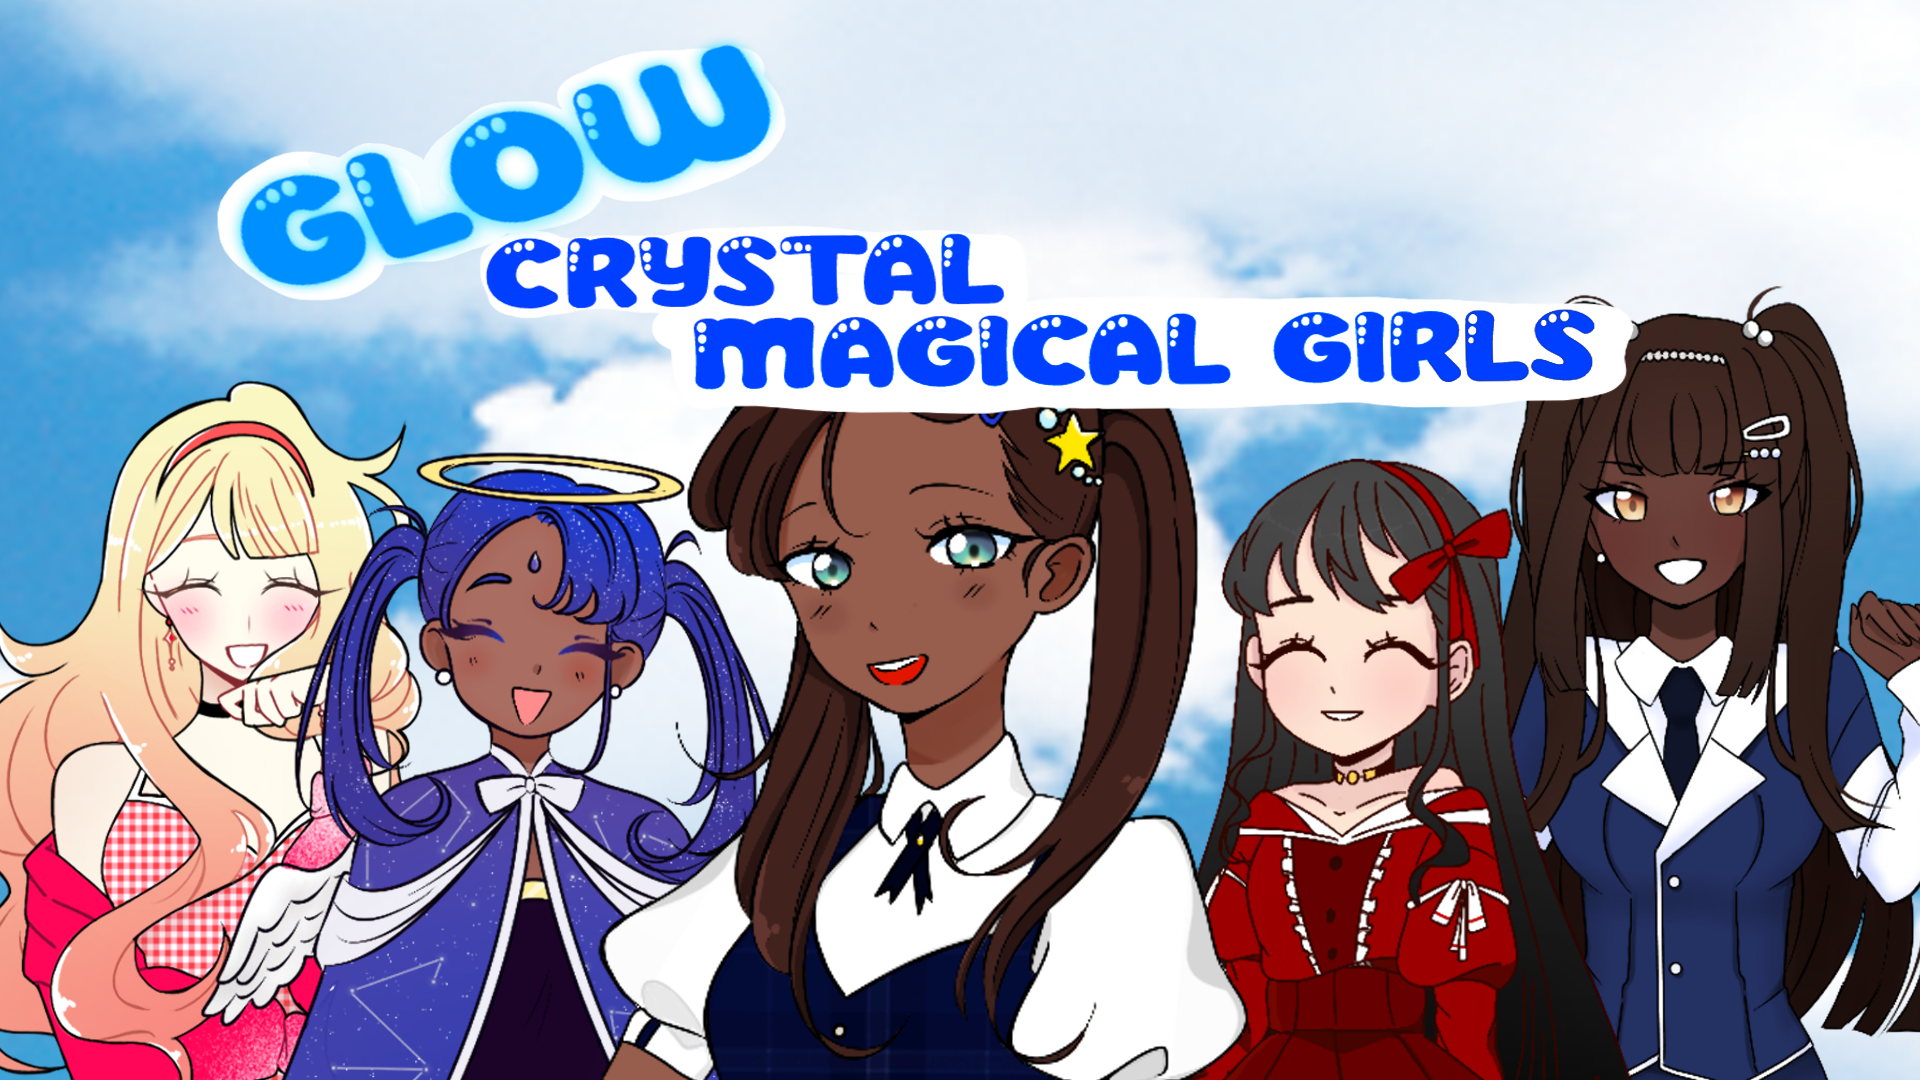 GLOW CRYSTALS MAGICAL GIRLS